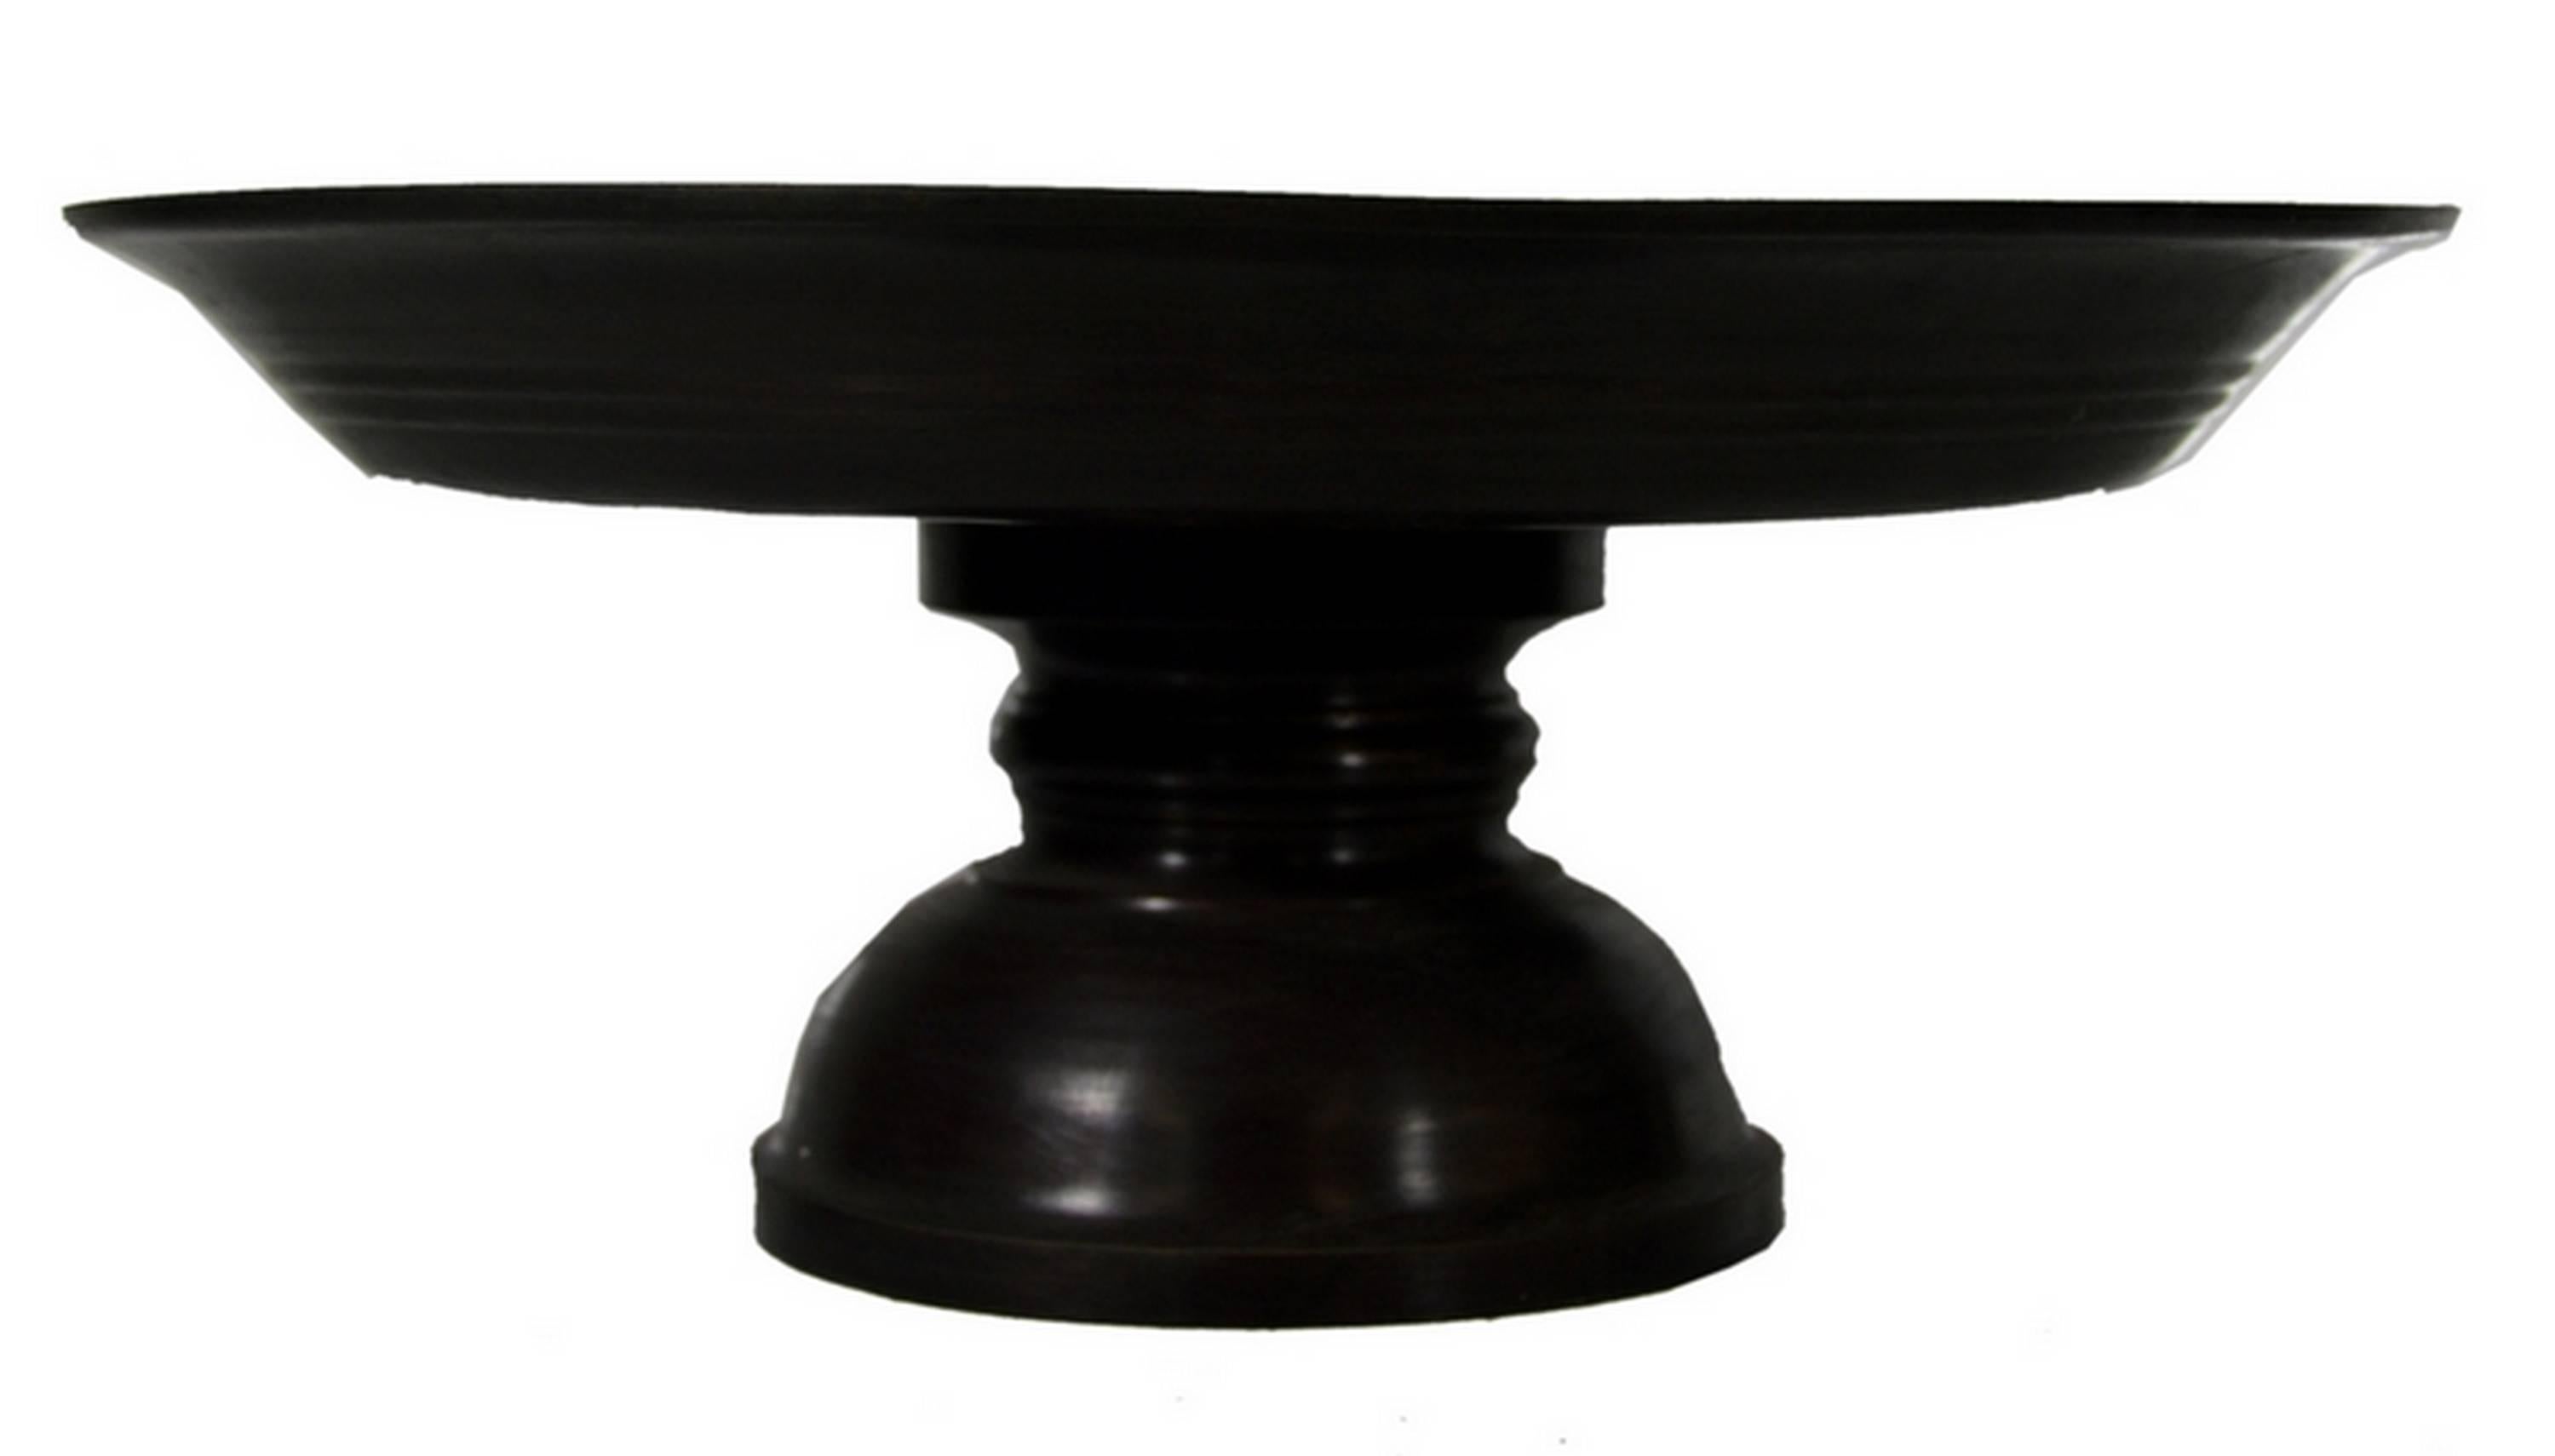 A cake stand made of bronze in a refined cylindrical shape from the late 20th century. This cake stand displays a flat cylindrical plate with a small edge angled upward. This top rests on an hollow baluster leg with a large bottom. This refined cake